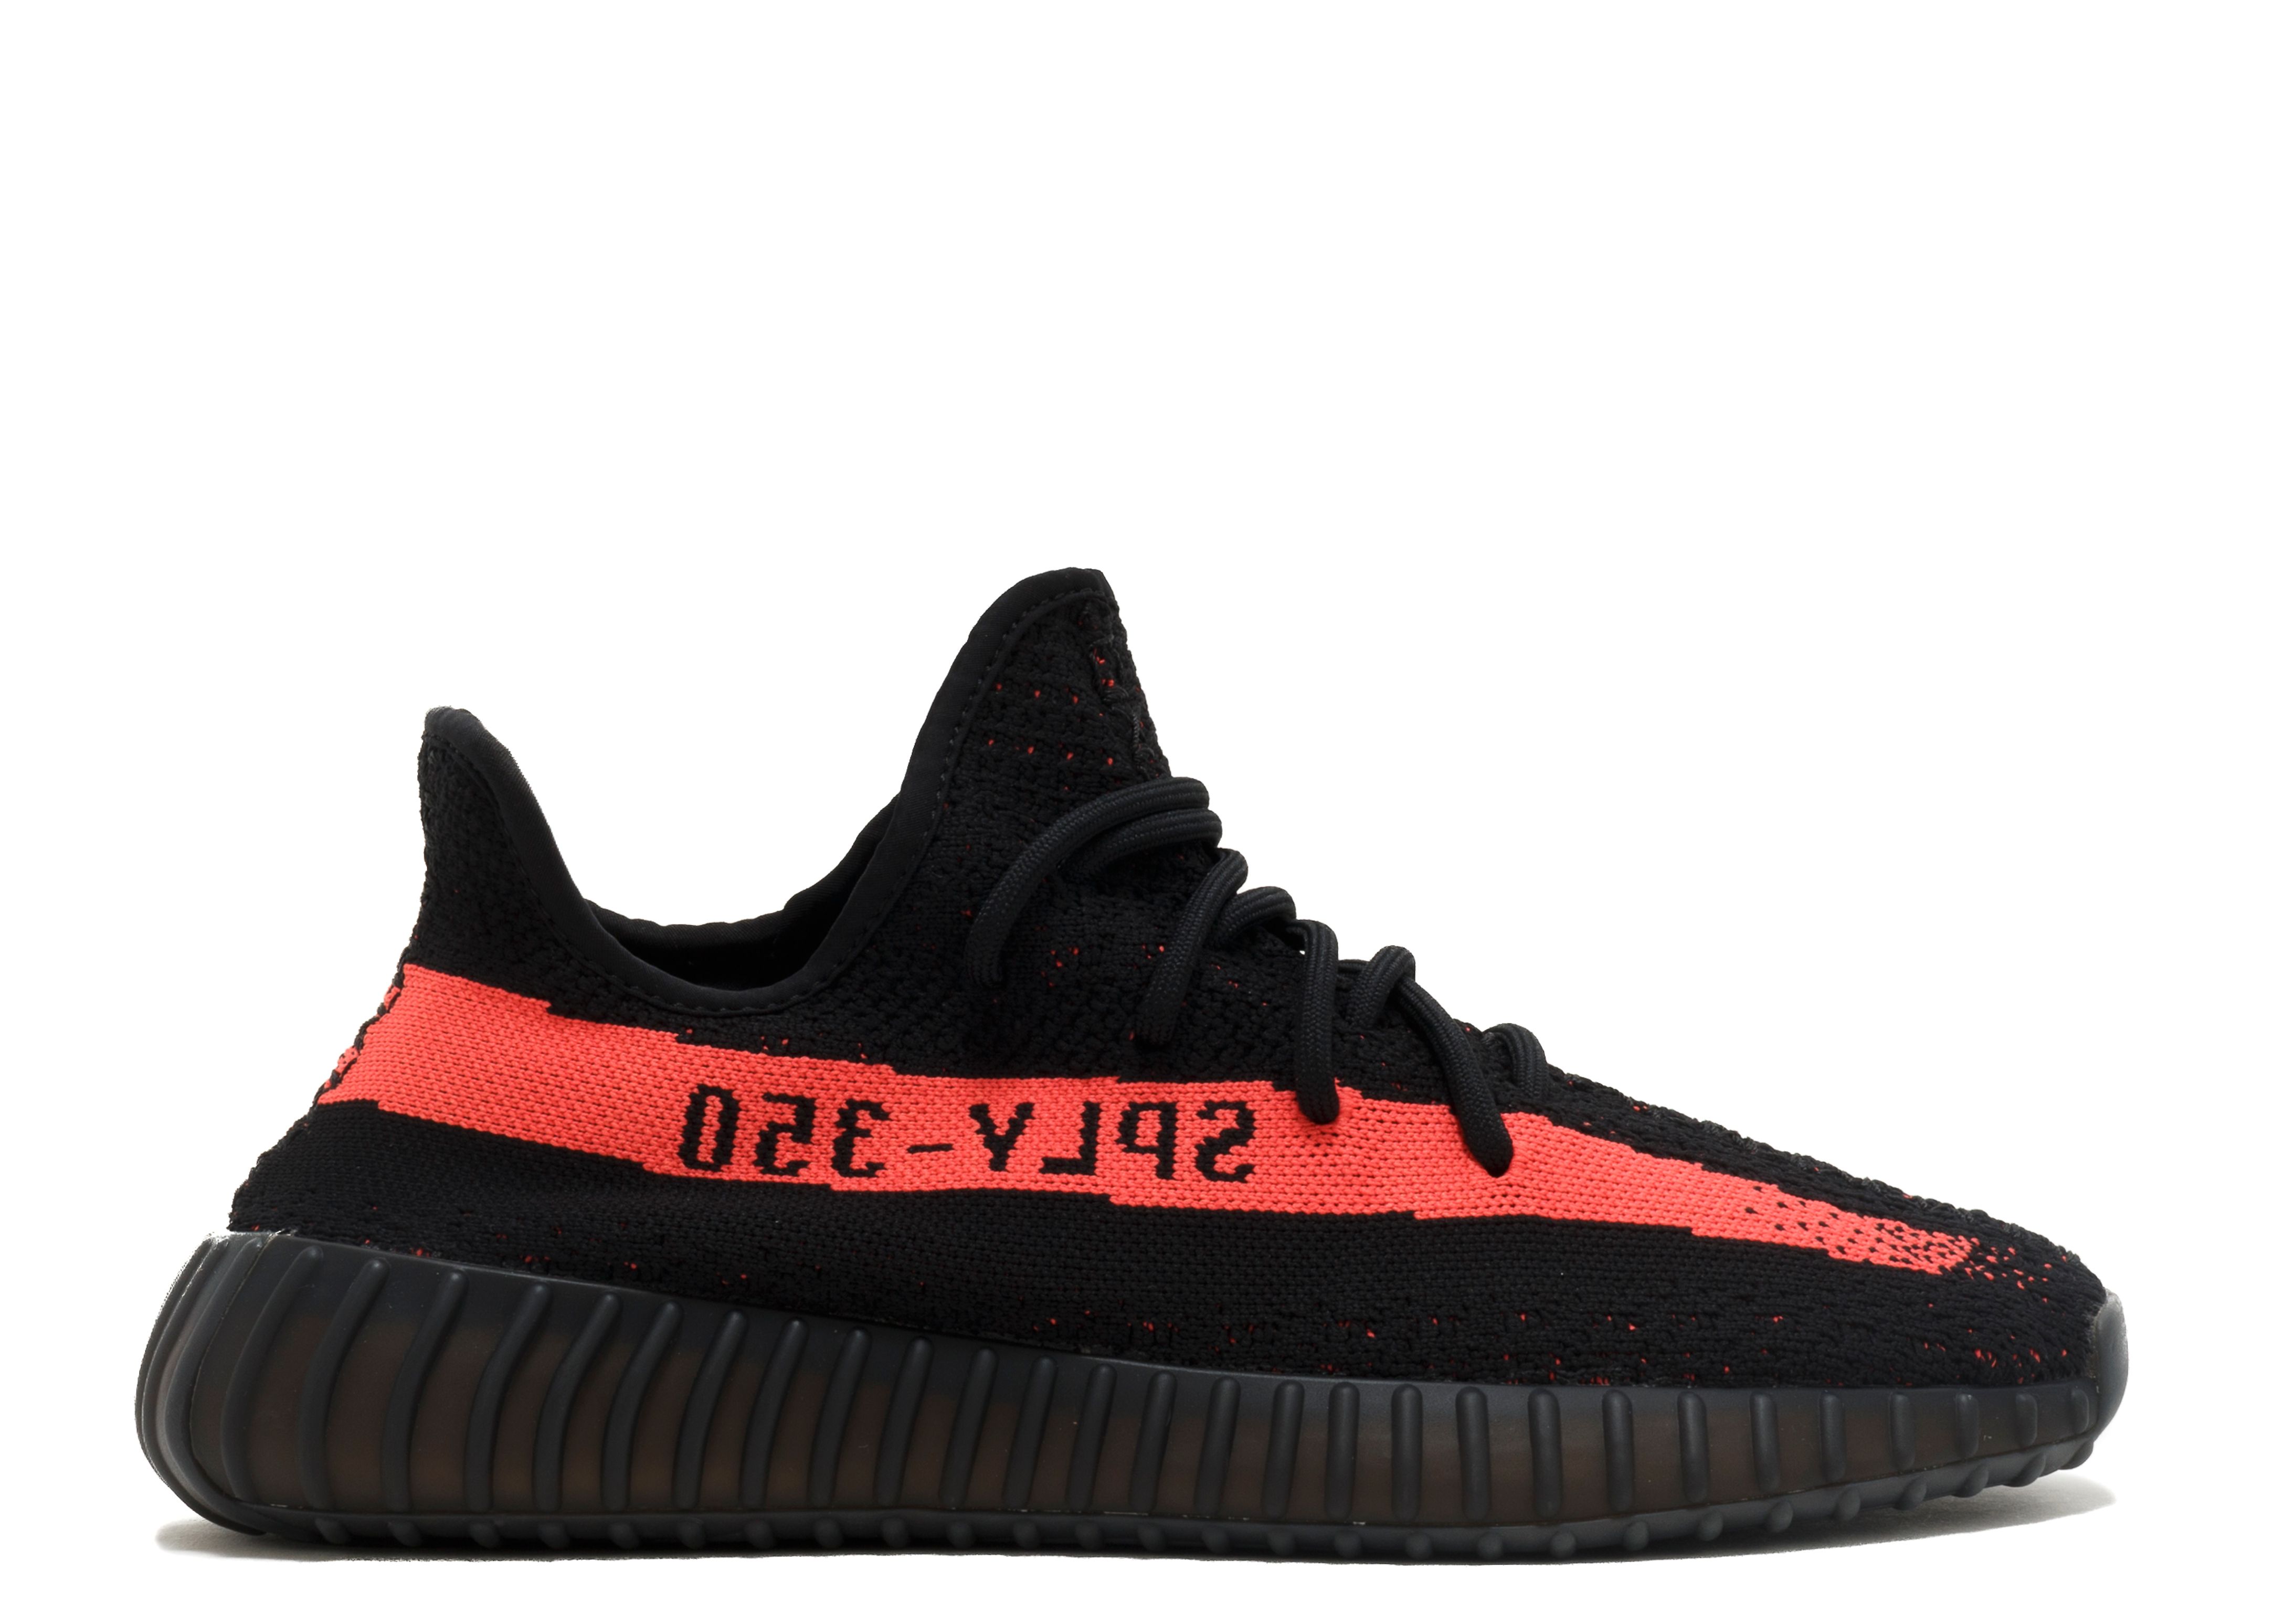 Kanye West Yeezy boost 'sply 350' v2 black red by9612 Sale 92% Off